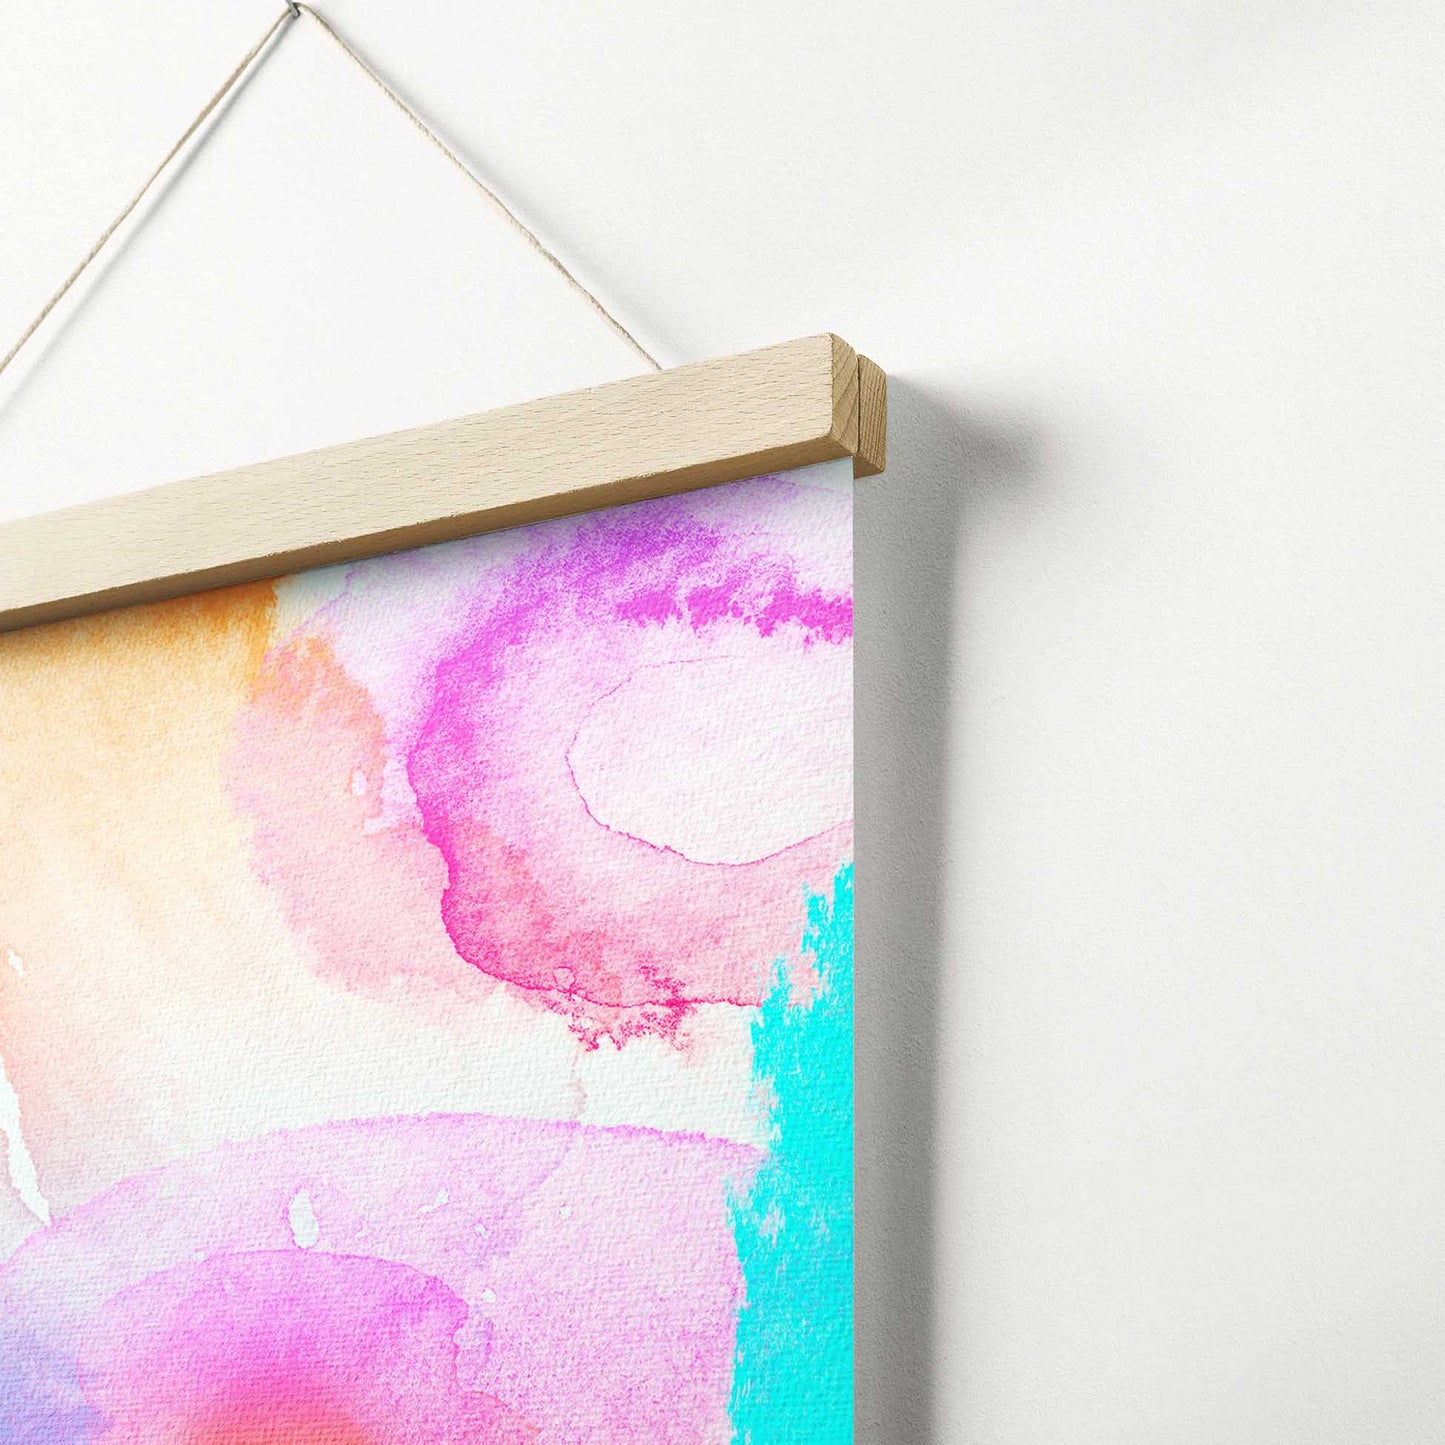 Enhance your interior design with the Personalised Watercolor Splash Poster Hanger. Its fresh and vibrant hues, along with the authentic watercolour style and bold paint splash, make it a standout accessory, classy and gallery-quality 